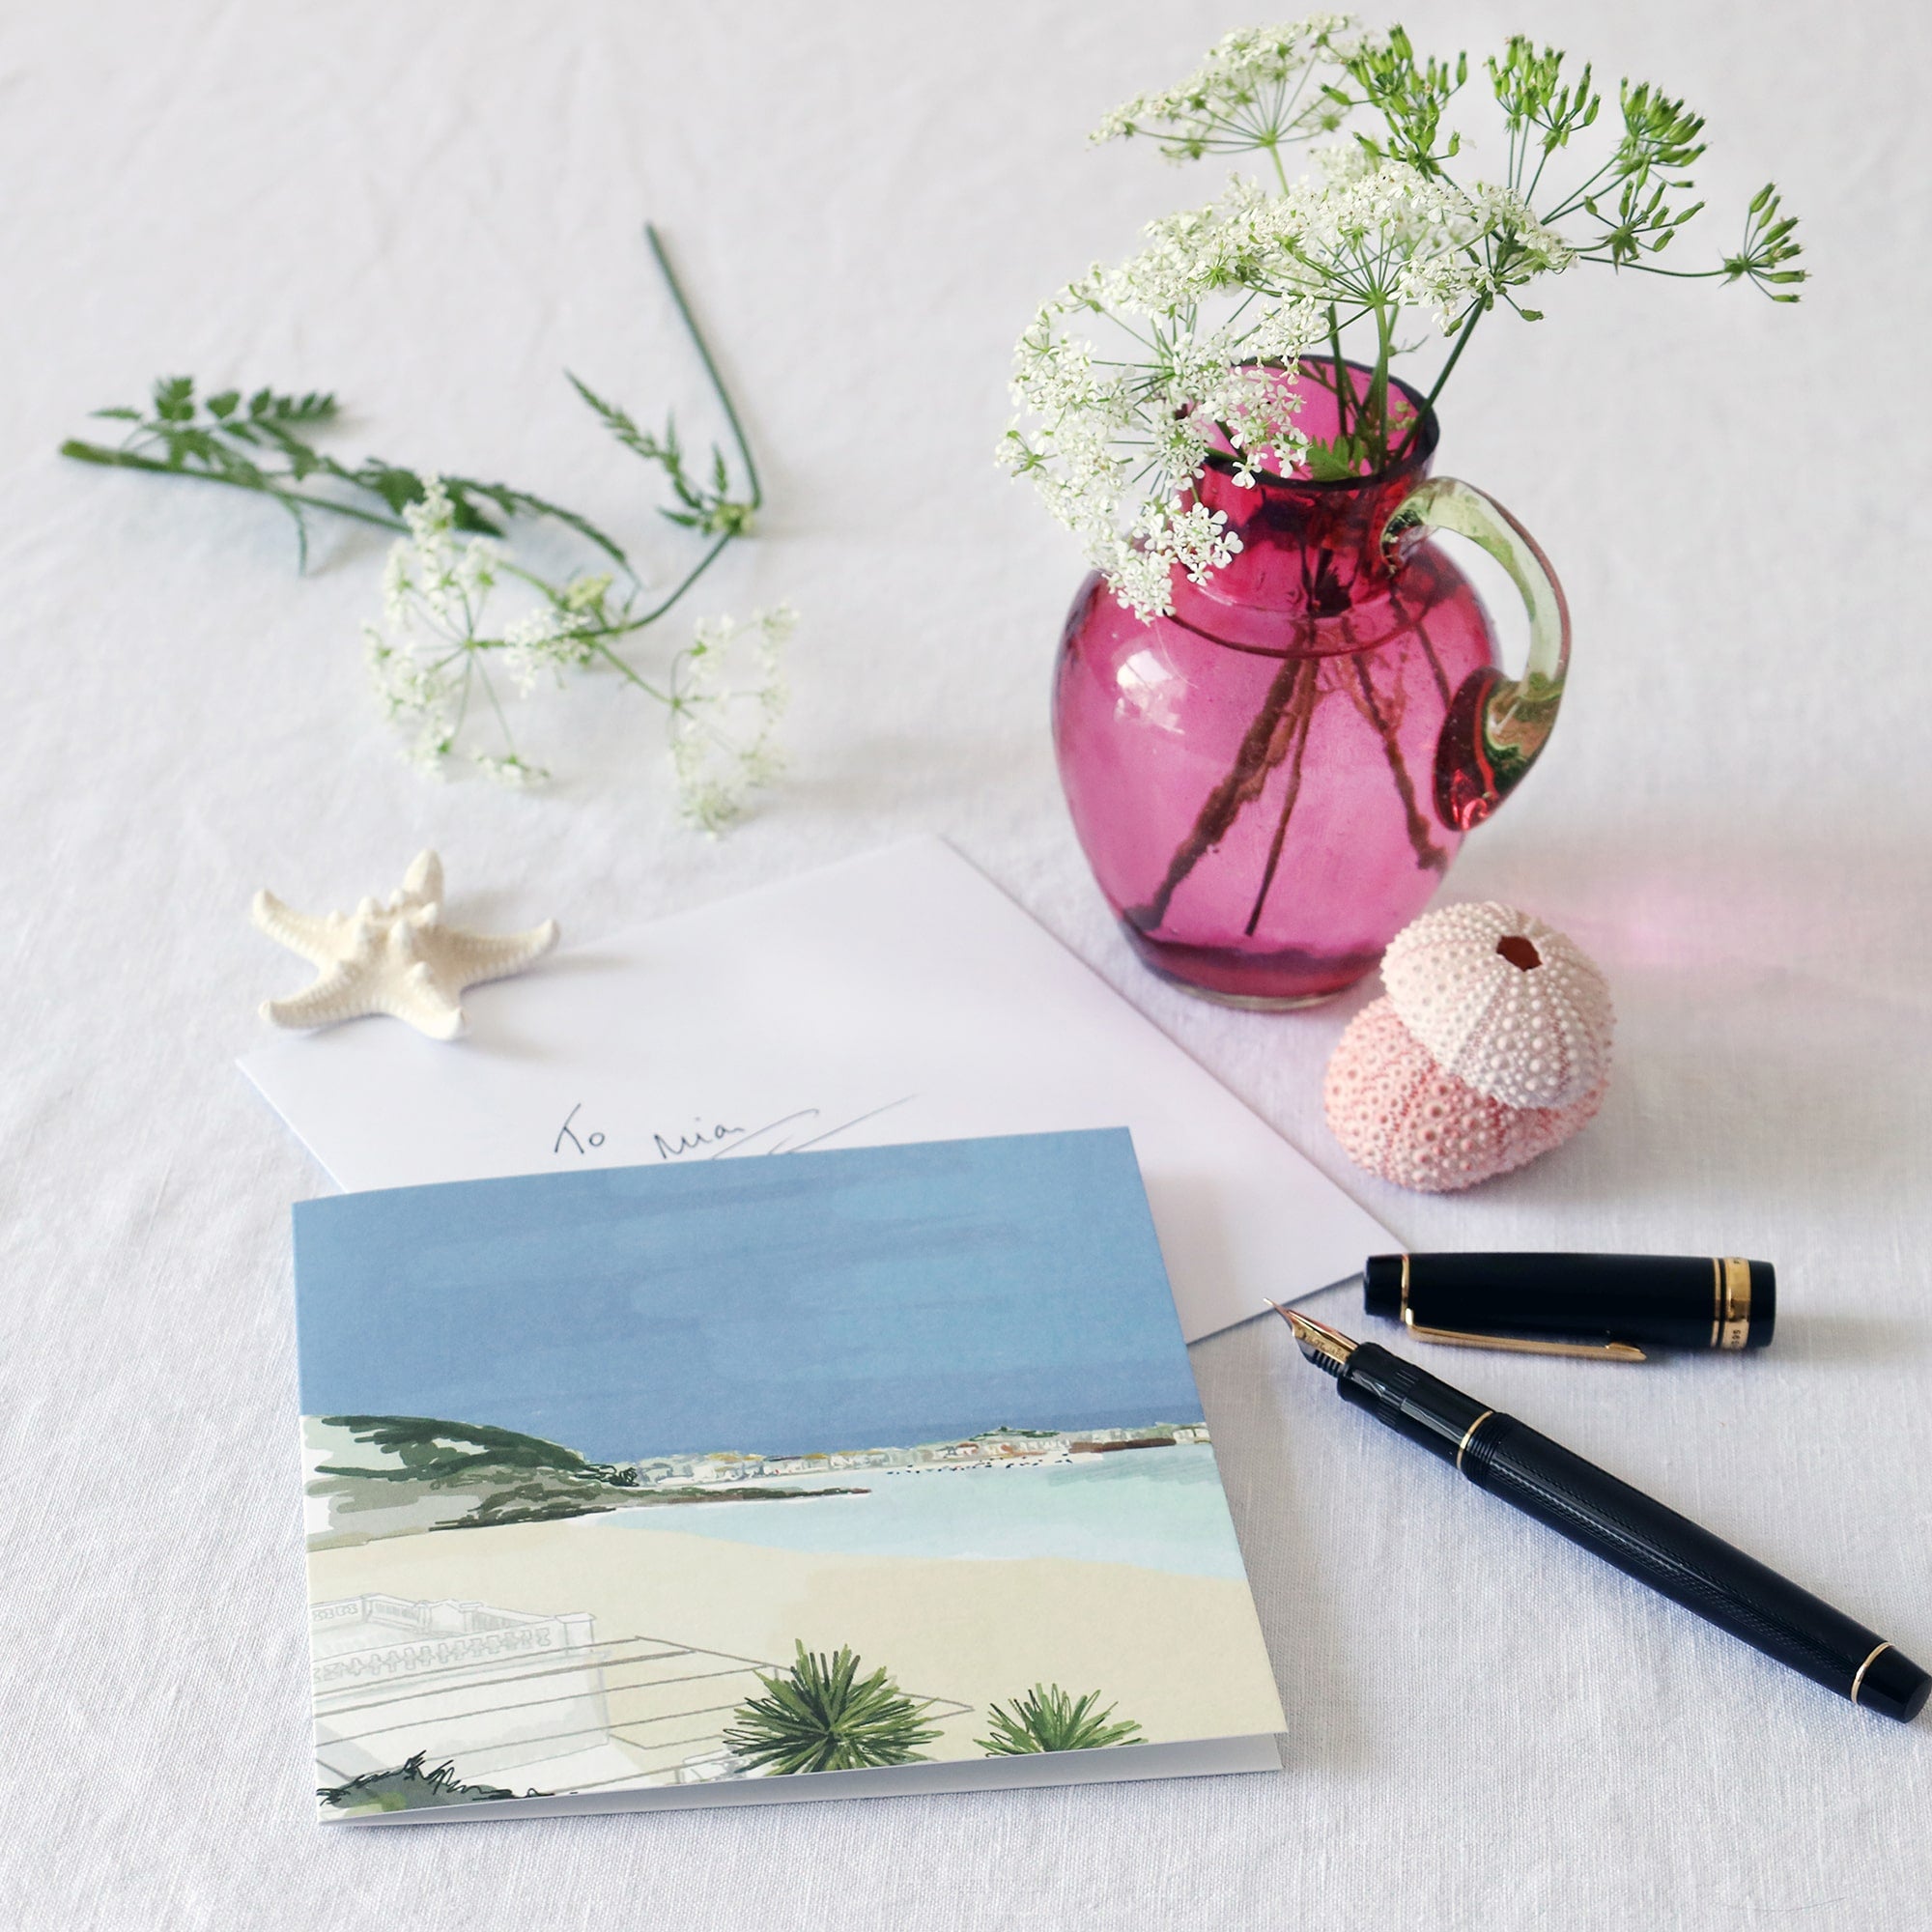 greeting card with illustration of the view across the beach from porthminster cafe st ives lying on a white table cloth with a fountain pen, hand written envelope shells and a small cranberry glass jug with wild flowers in 